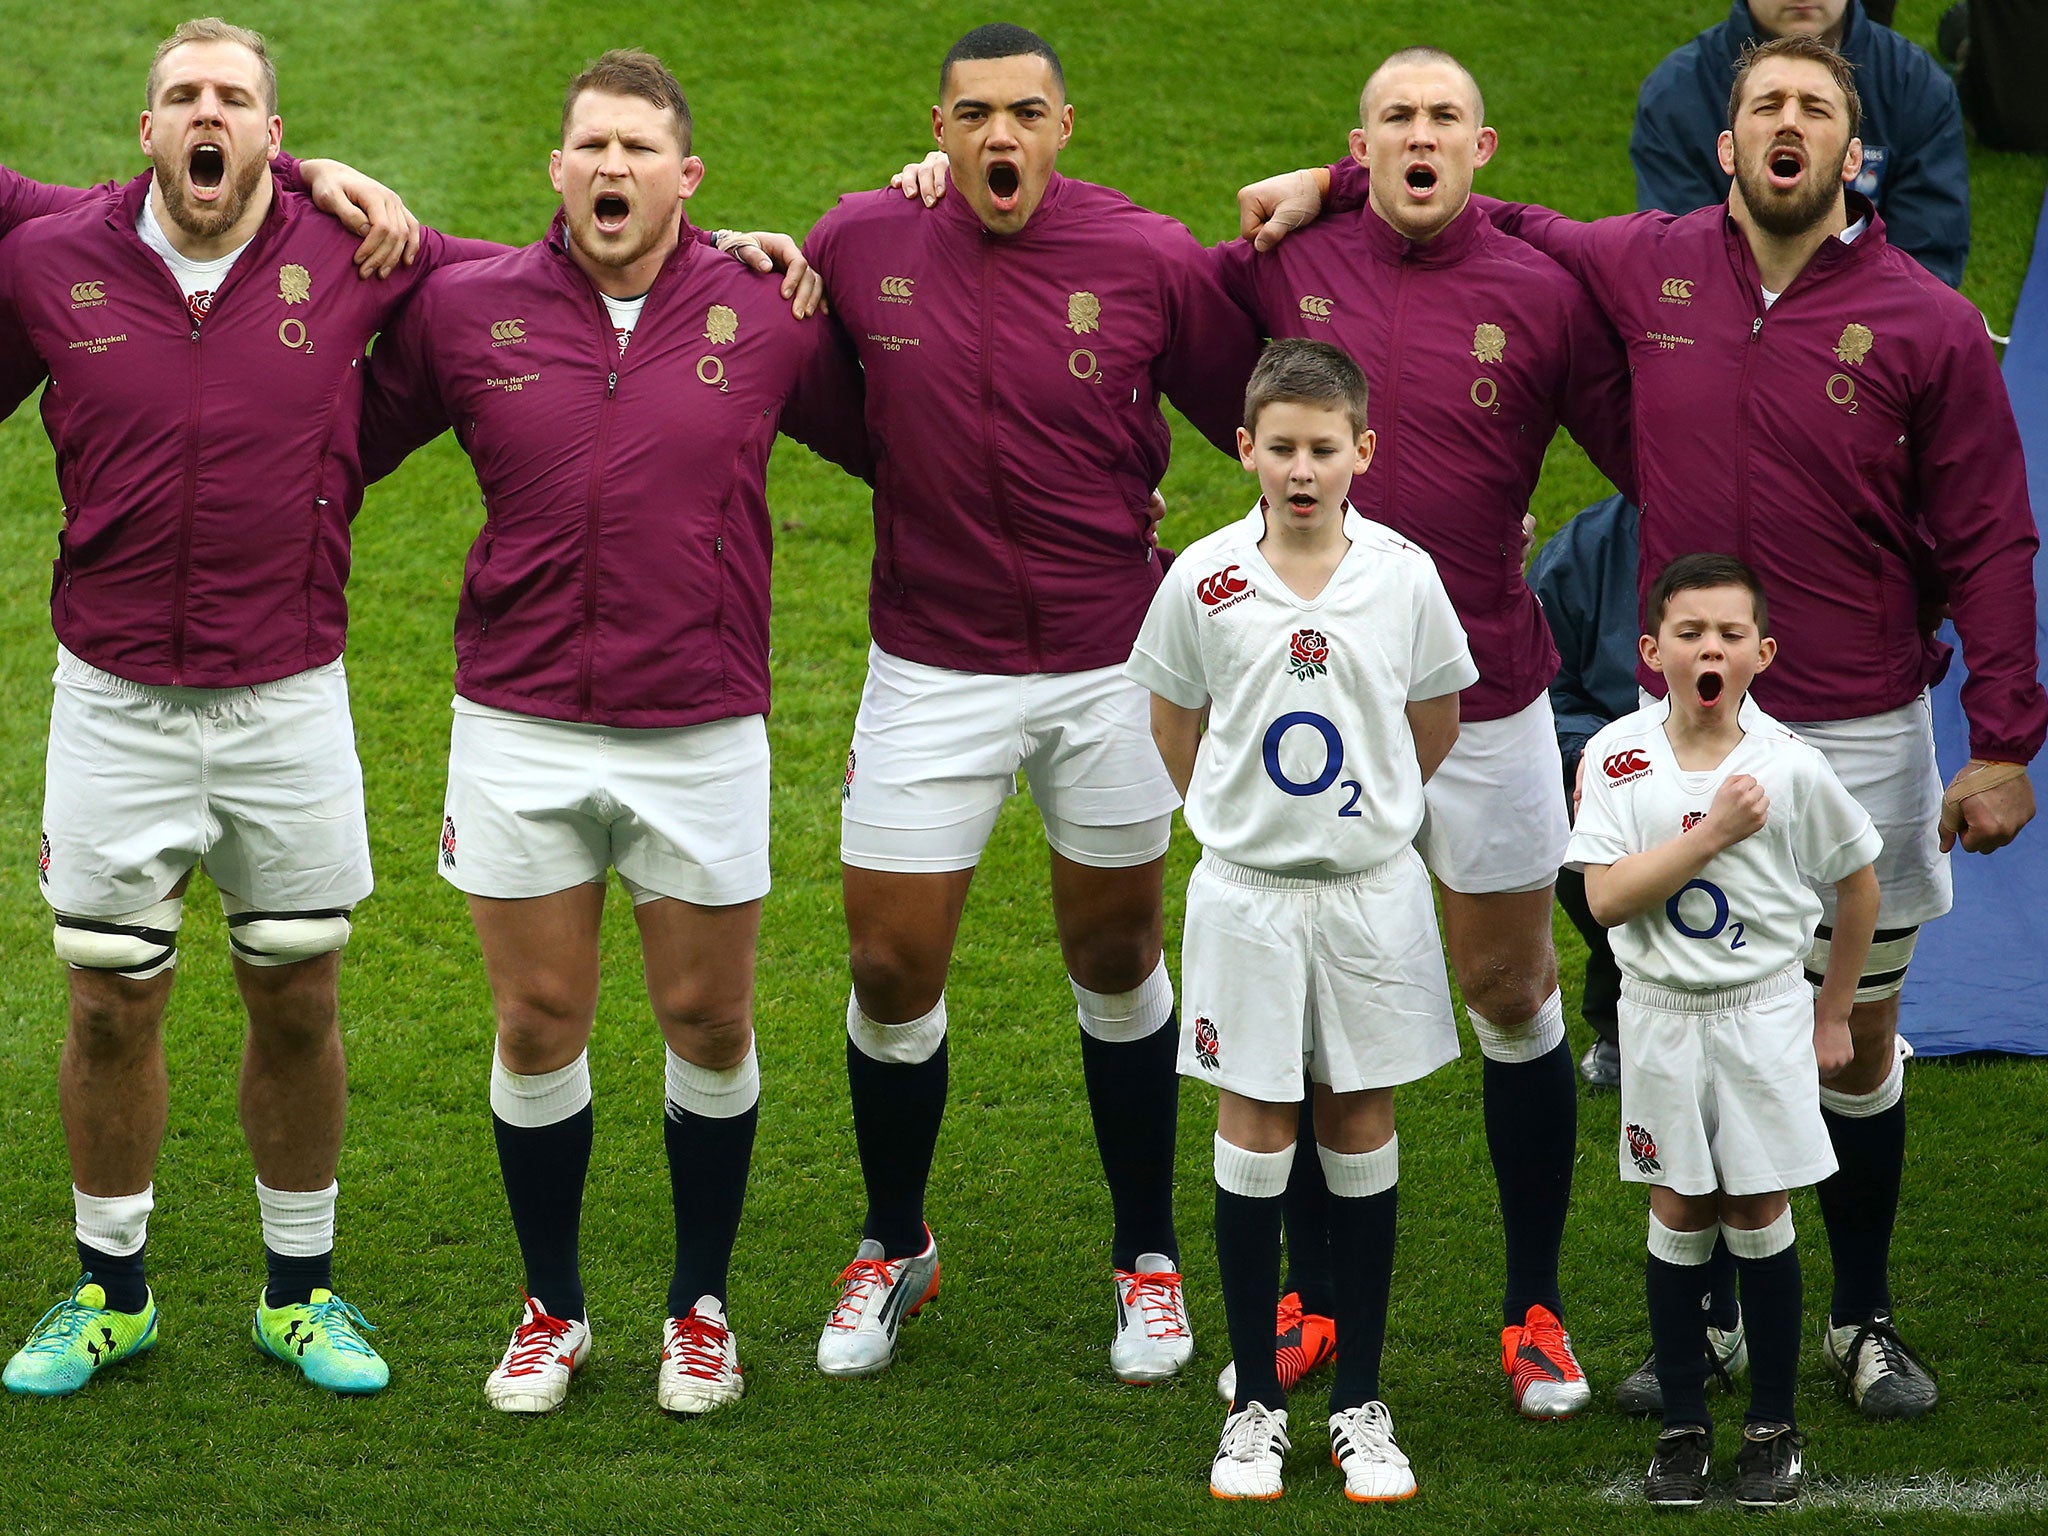 Harry Westlake (r) sings the national anthem with the England rugby team